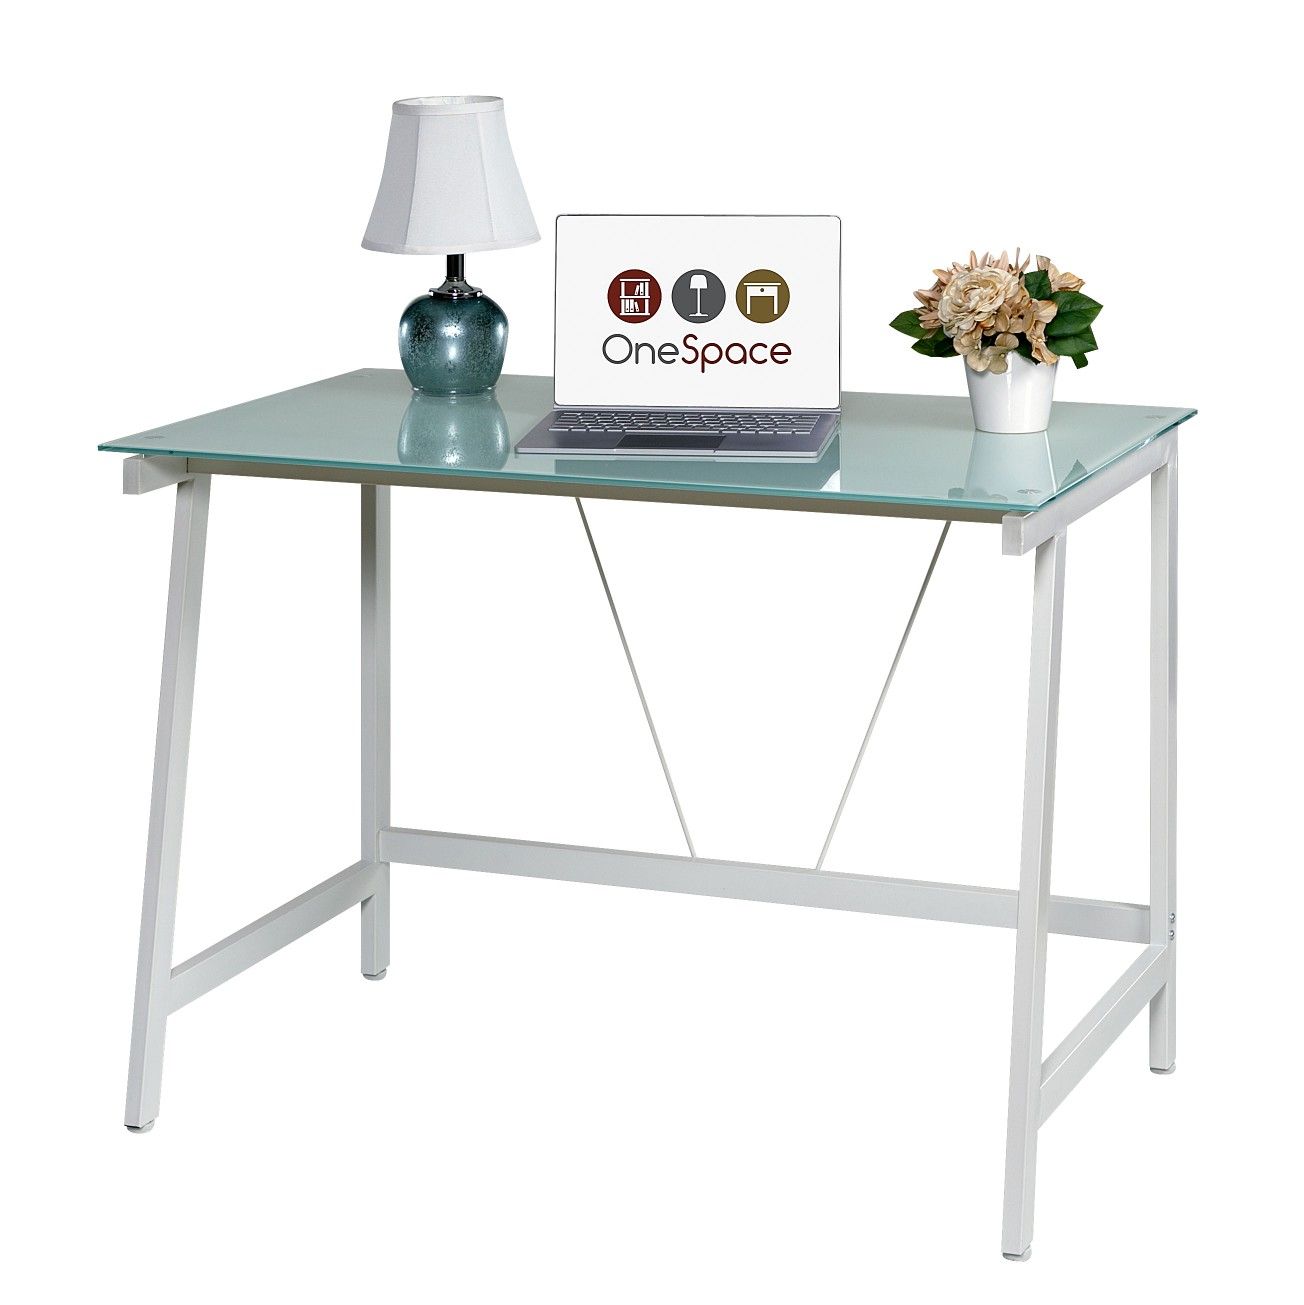 OneSpace 50-HD0107 Contemporary Glass Writing Desk, Steel Frame, White and Cool Blue 11c